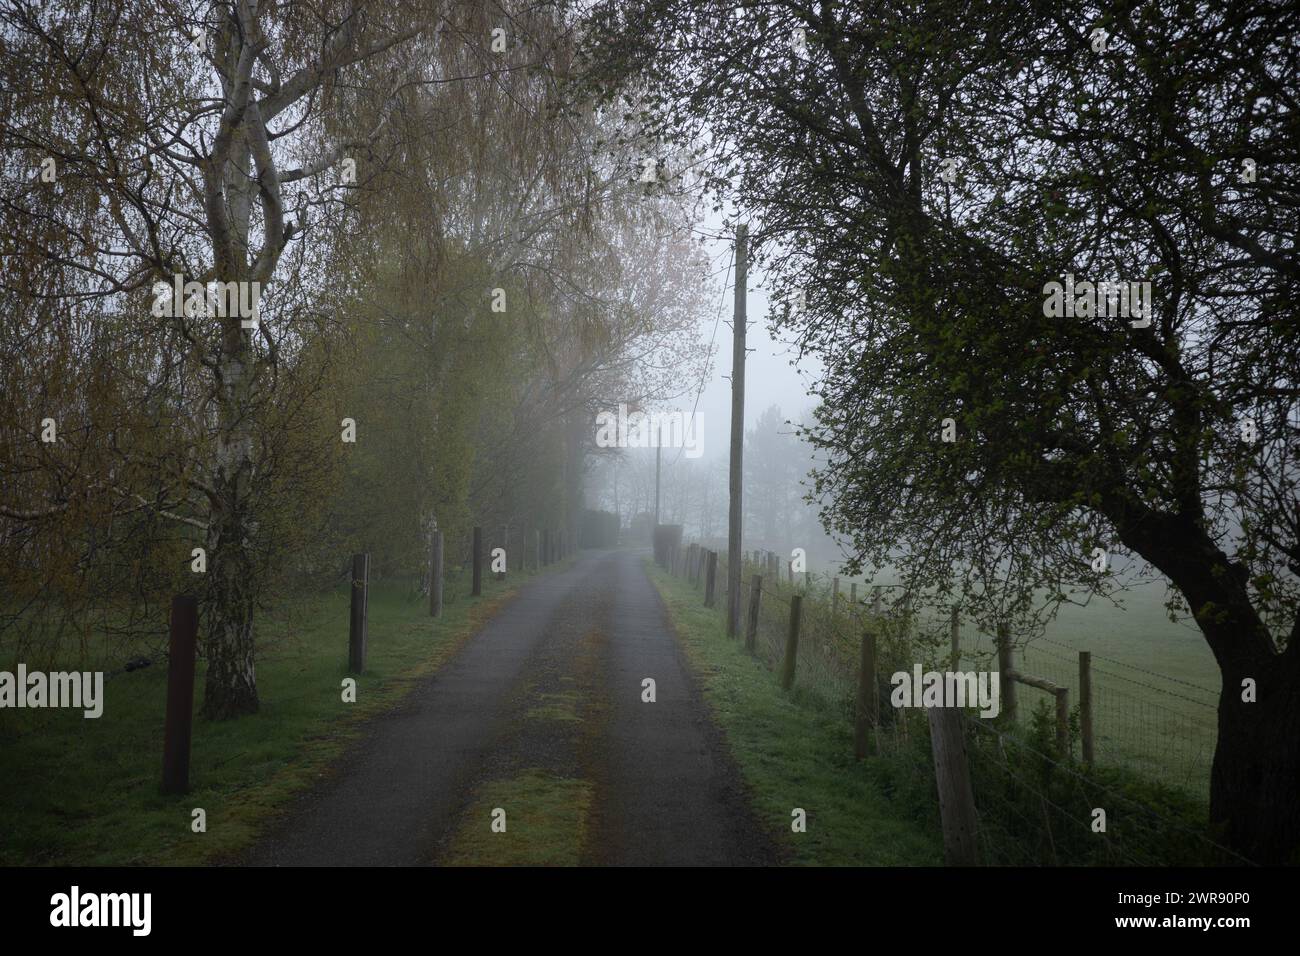 Small metalled road in light mist Stock Photo